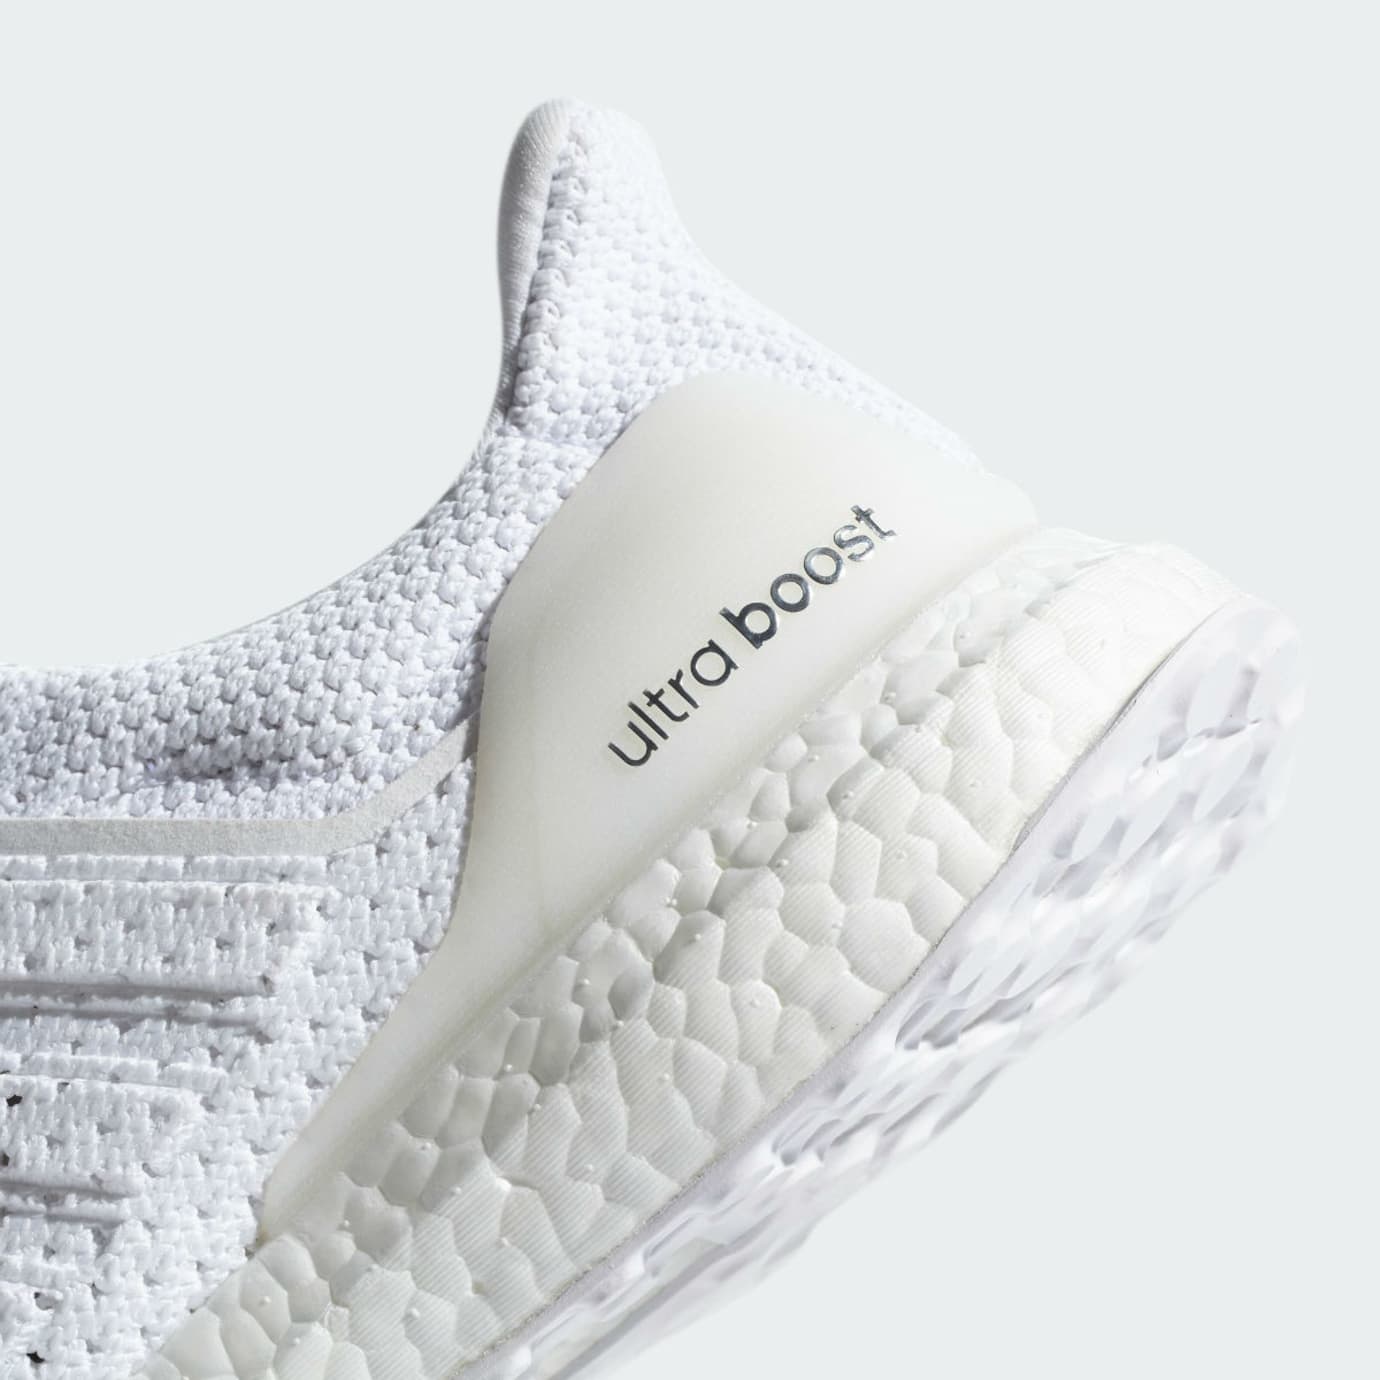 Adidas Ultra Boost Climacool White BY8888 Release Date Midsole